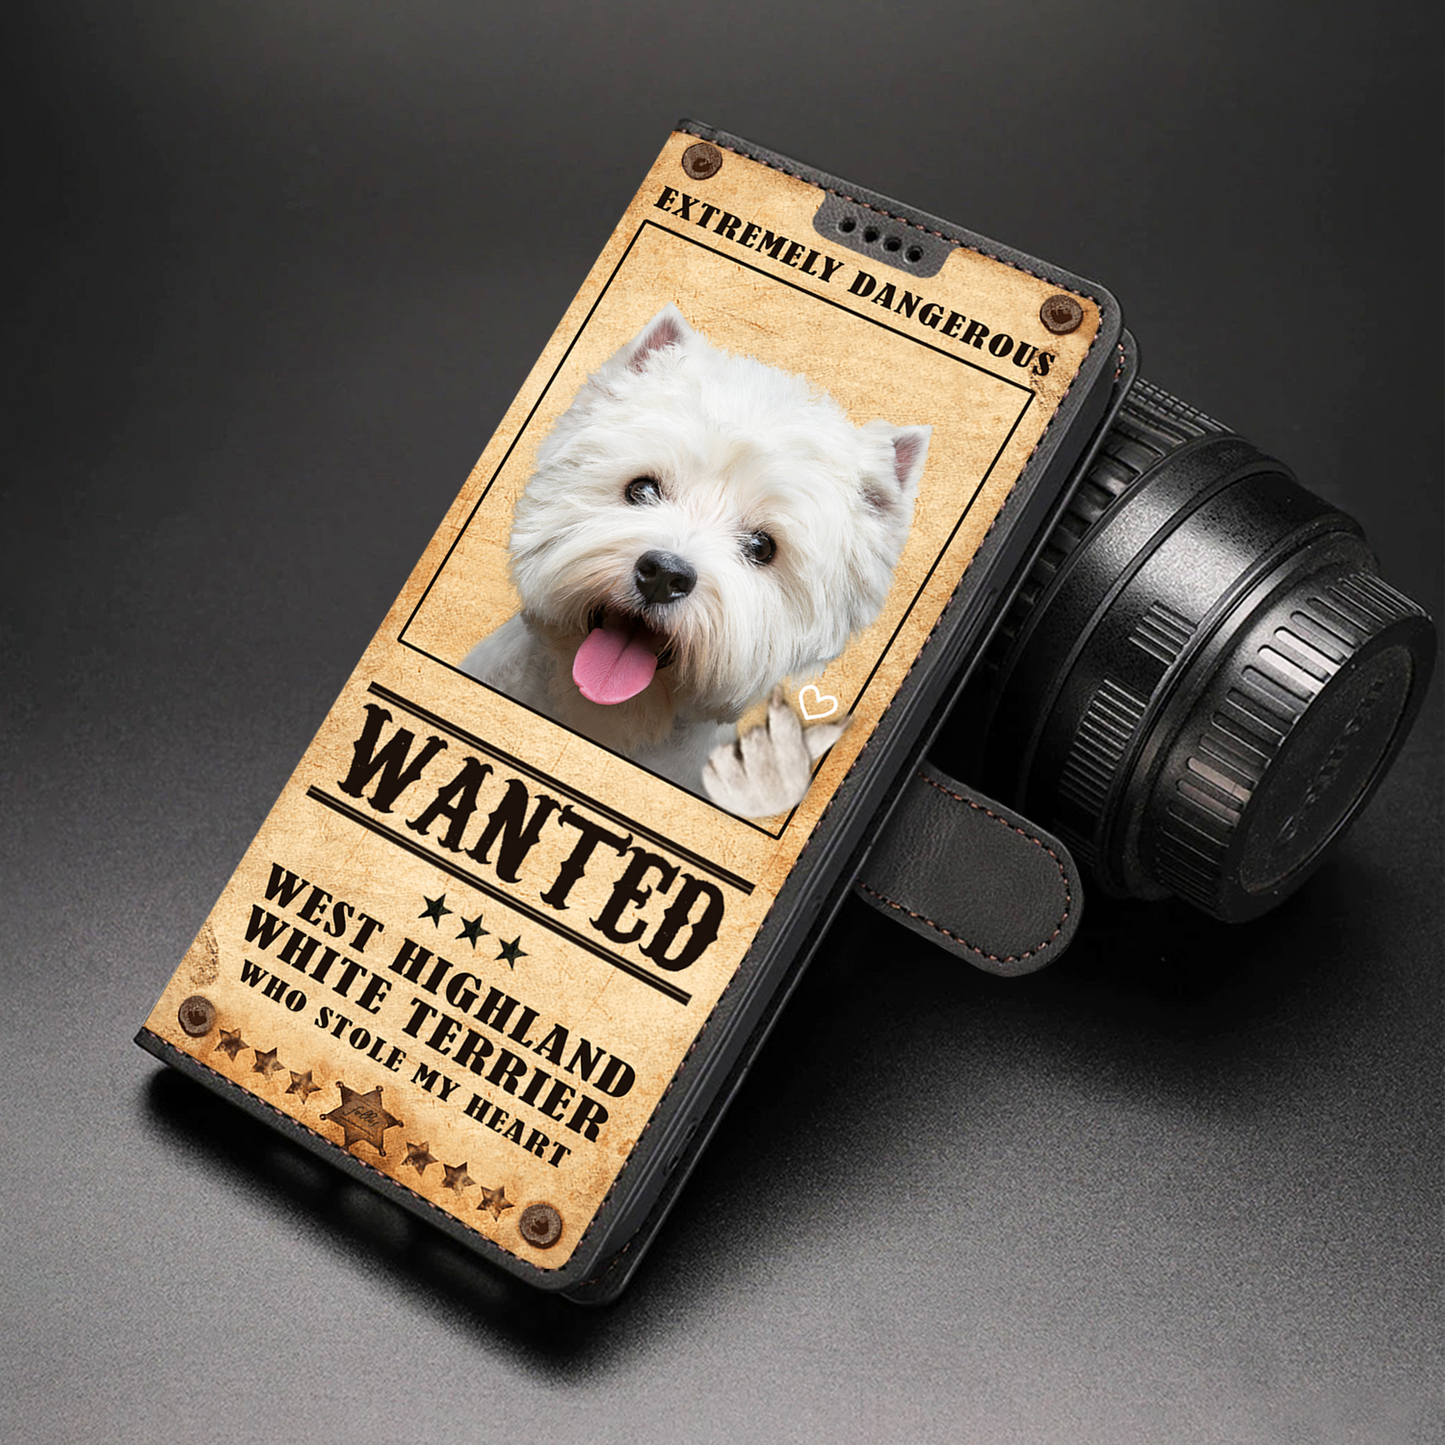 Heart Thief West Highland White Terrier - Love Inspired Wallet Phone Case V1